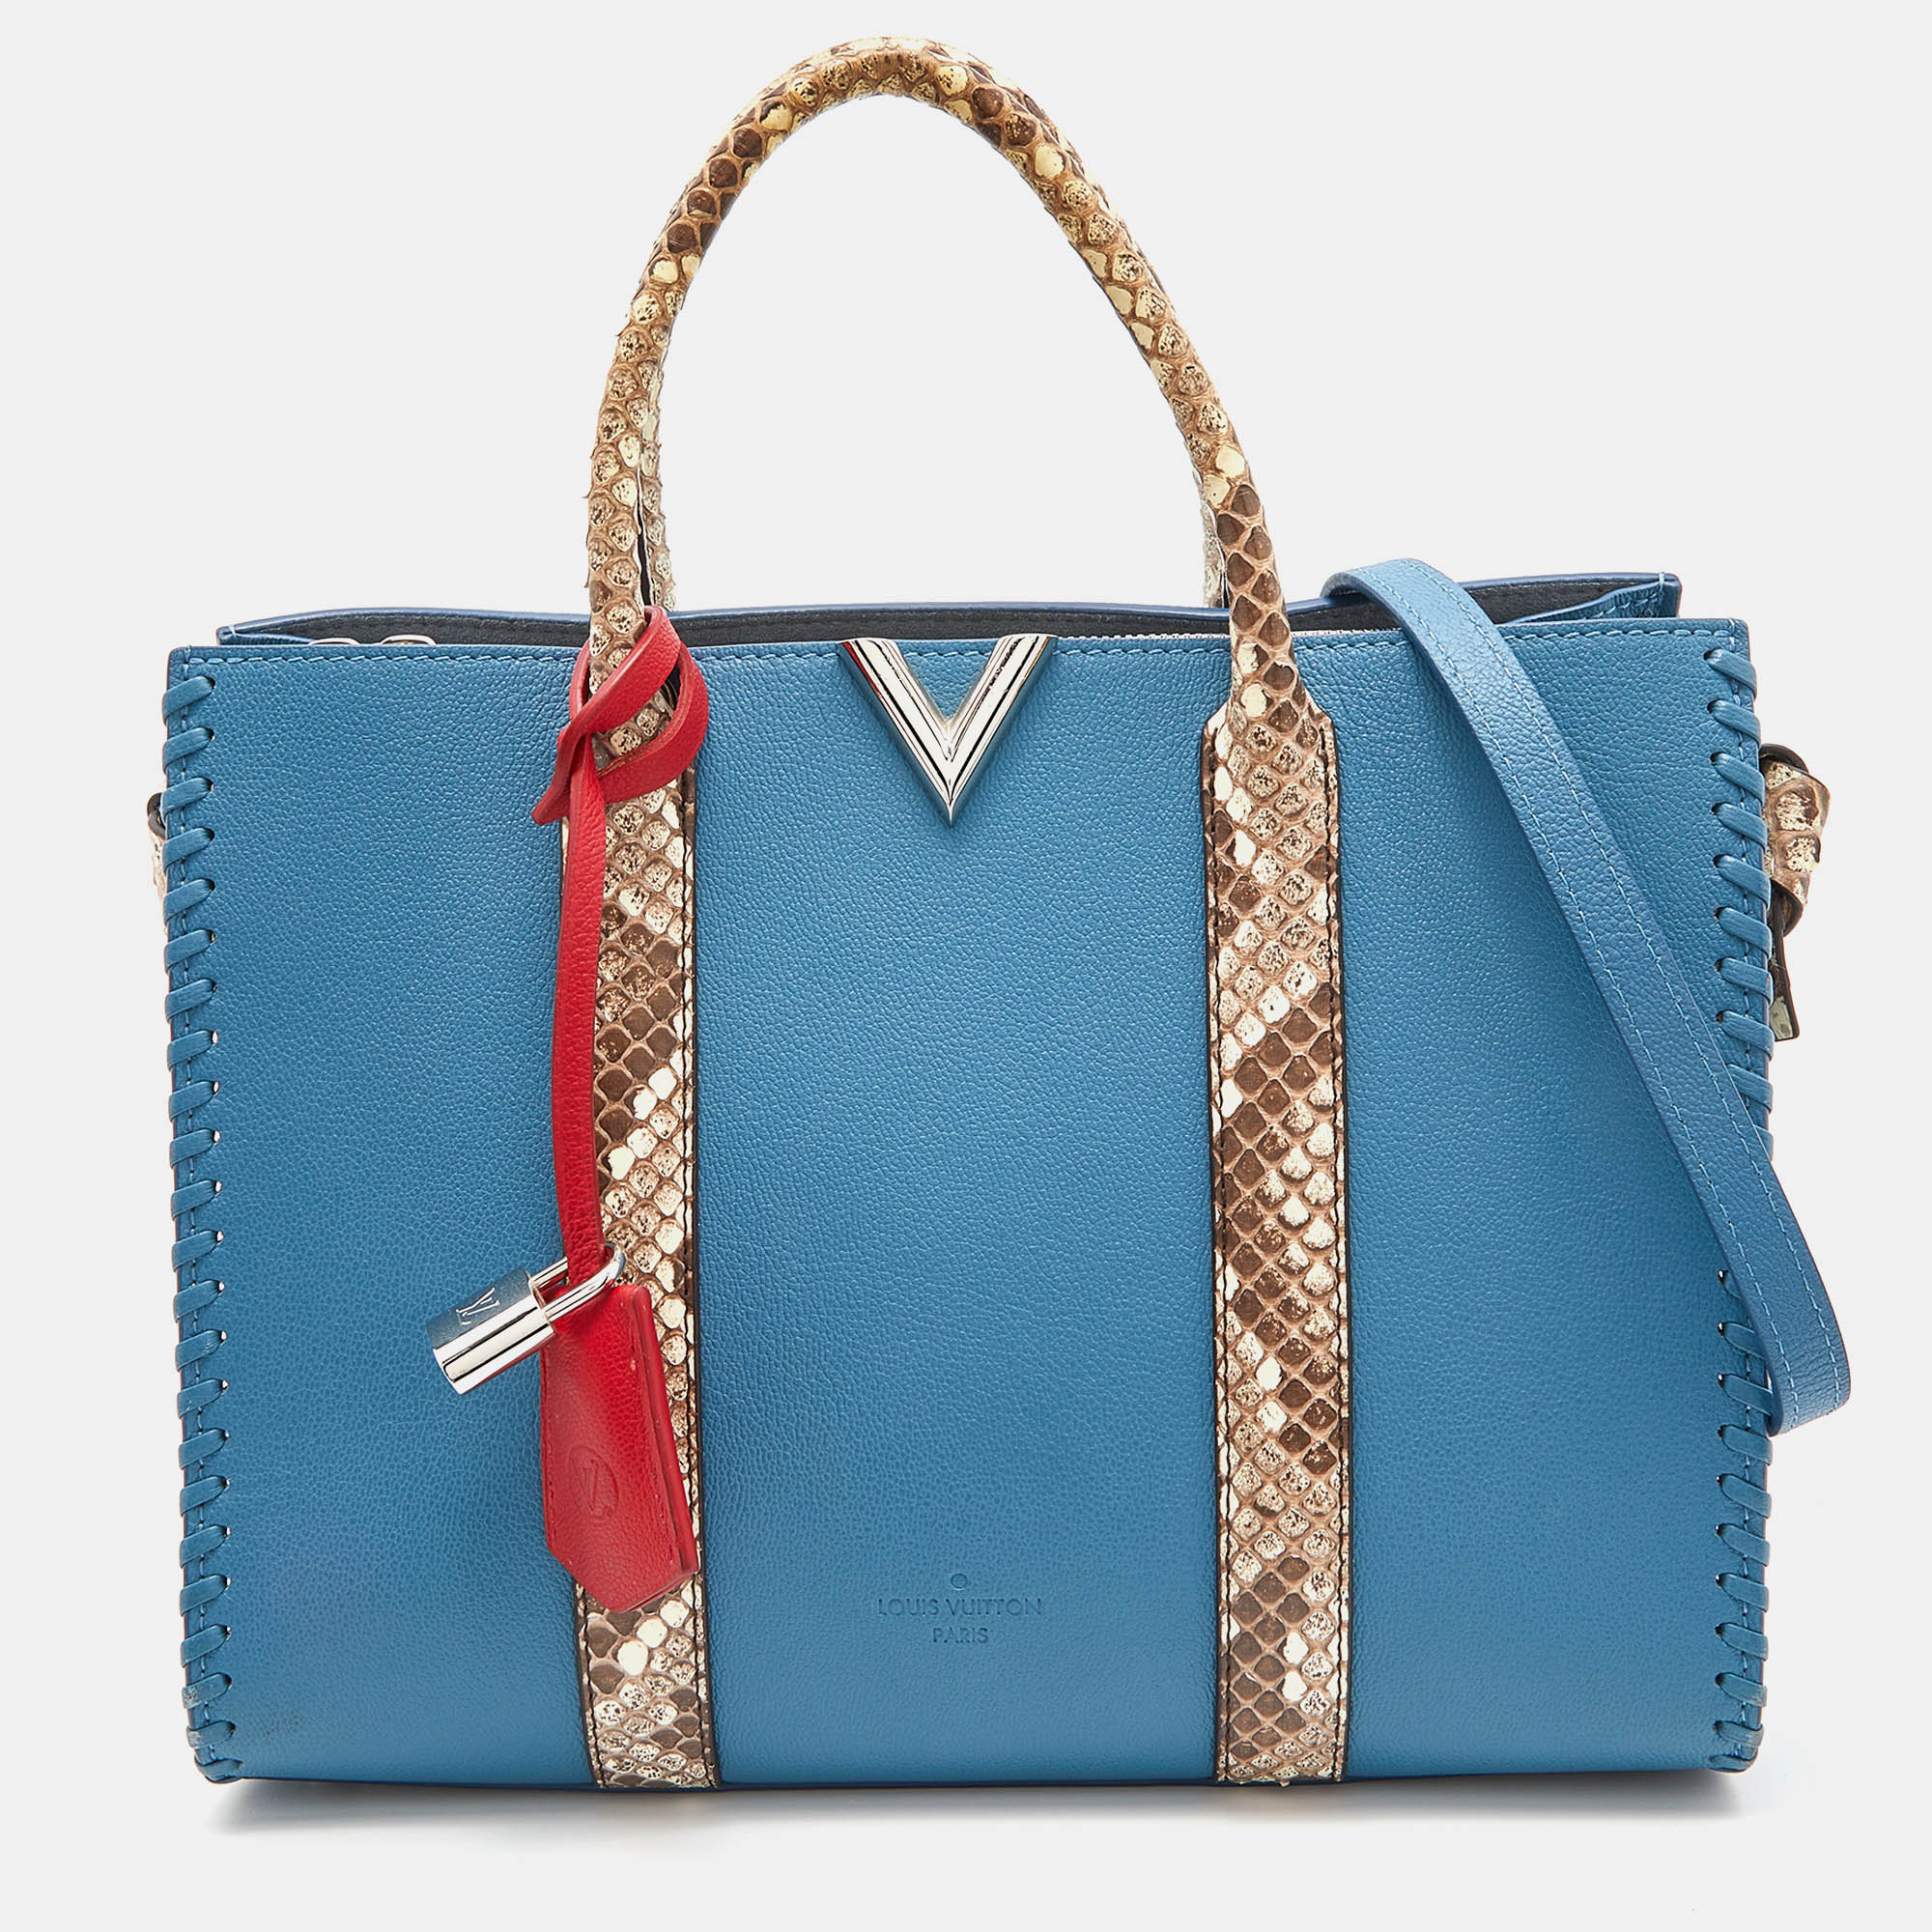 Striking a beautiful balance between essentiality and opulence this Very tote from the House of Louis Vuitton ensures that your handbag requirements are taken care of. It is equipped with practical features for all day ease.